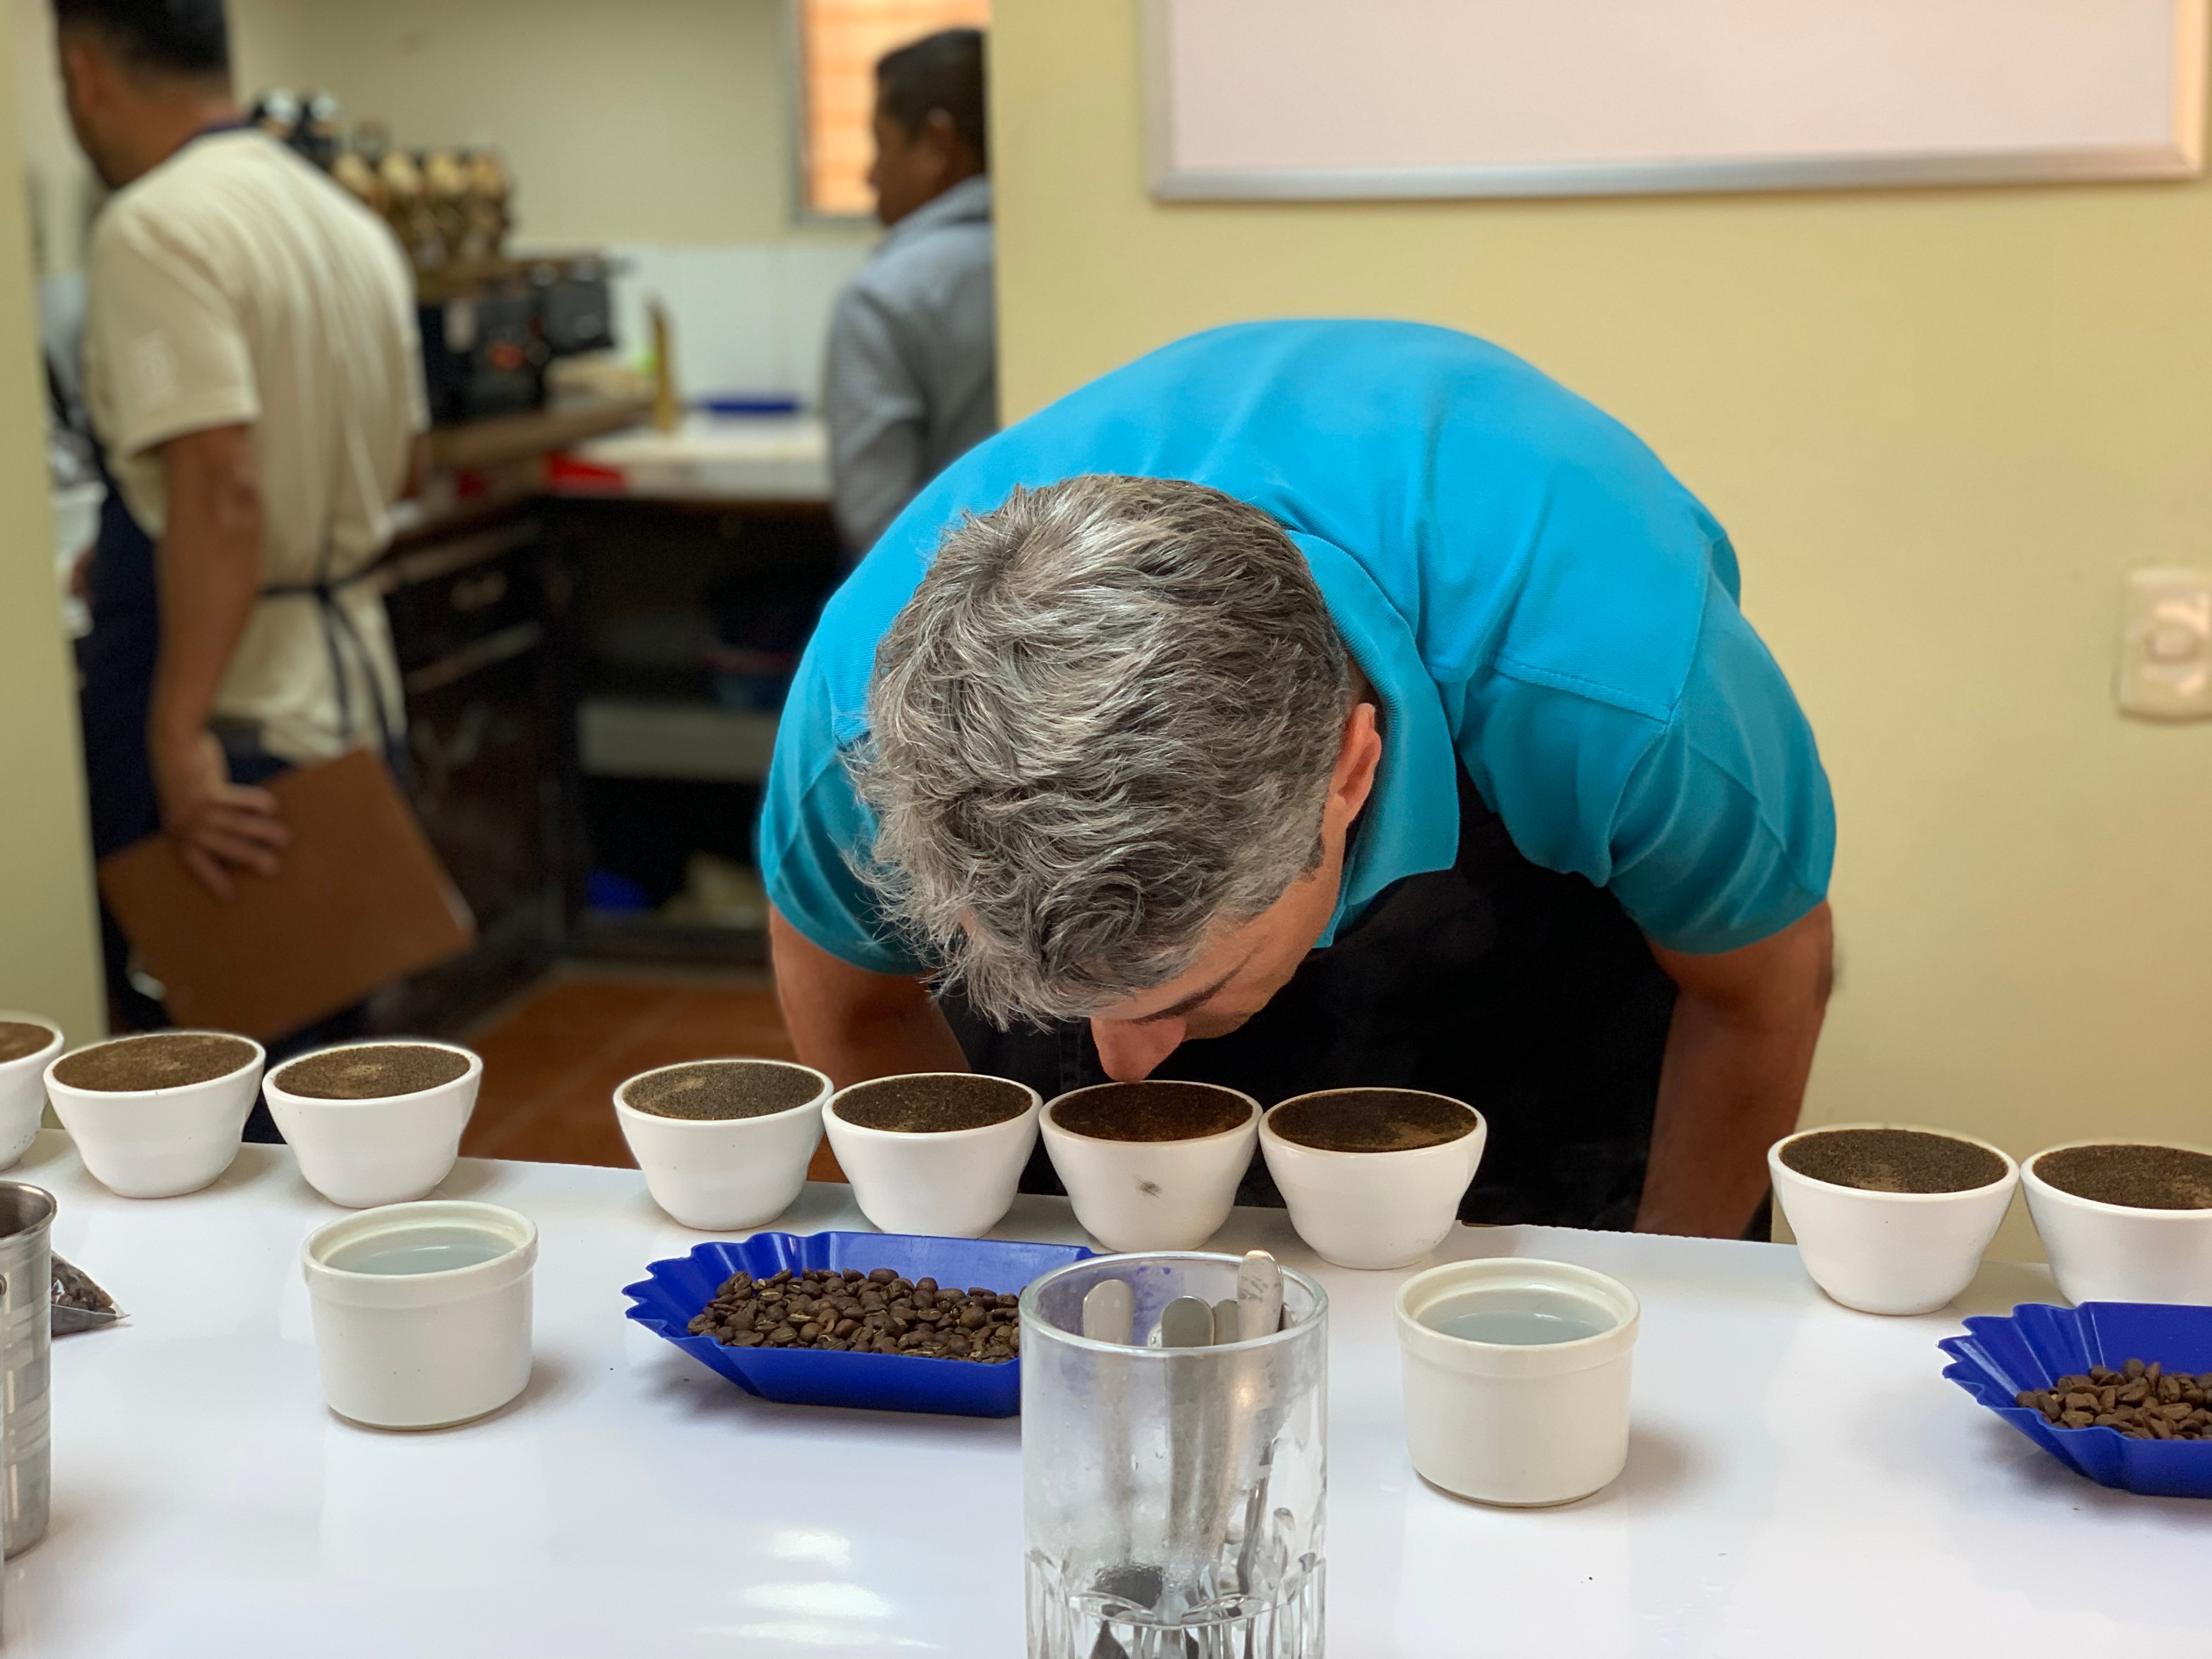 A man in blue shirt cupping coffee on a table